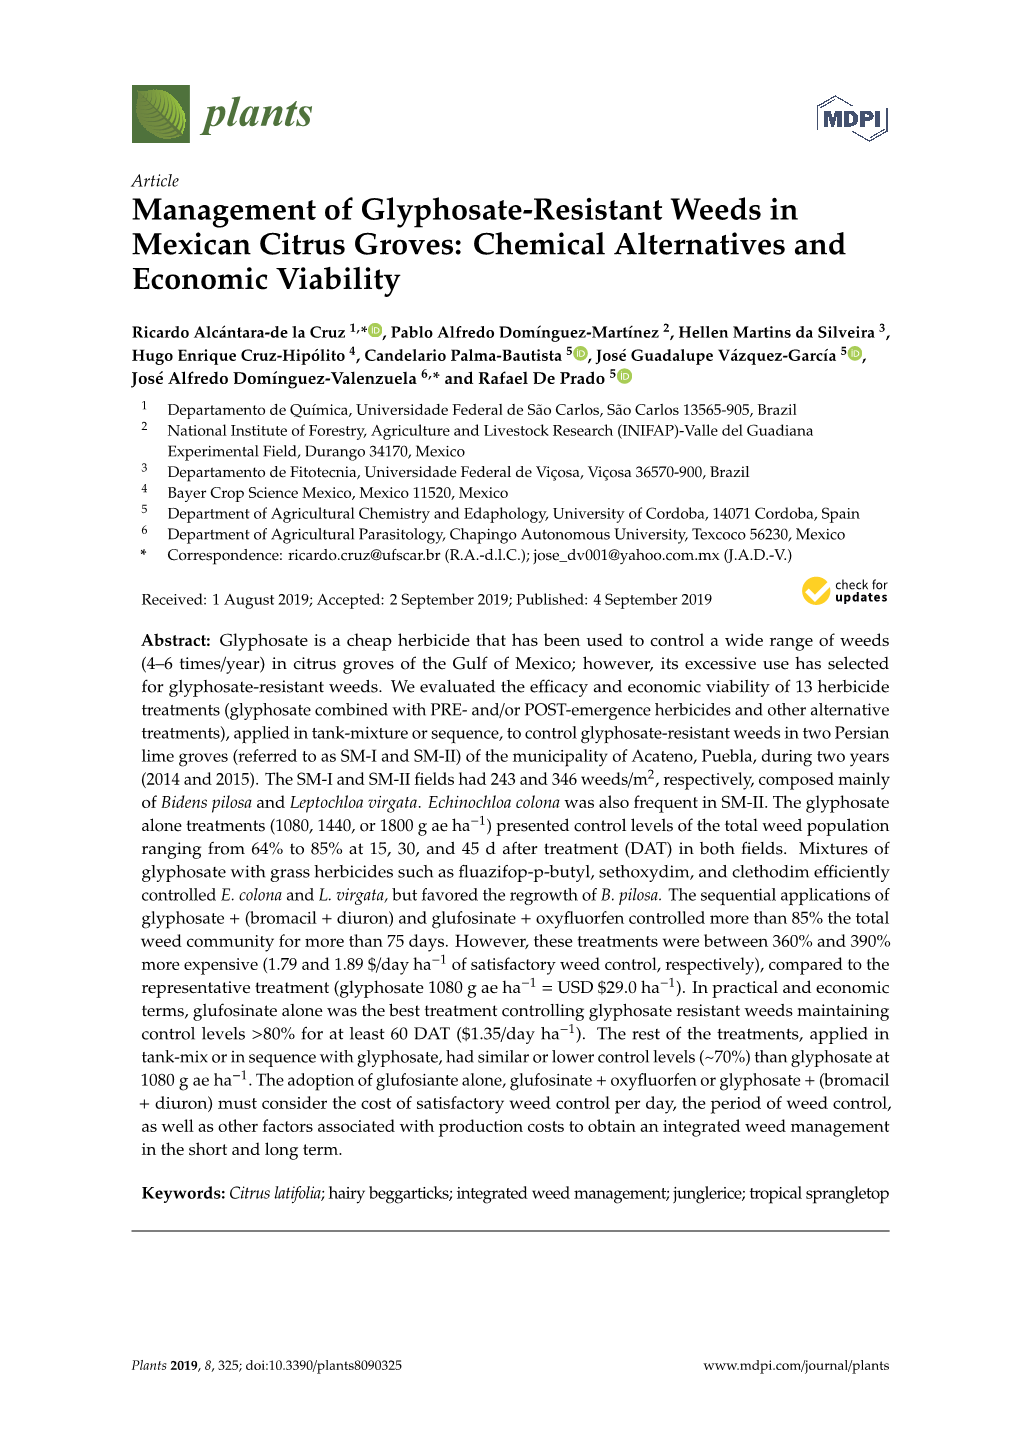 Management of Glyphosate-Resistant Weeds in Mexican Citrus Groves: Chemical Alternatives and Economic Viability